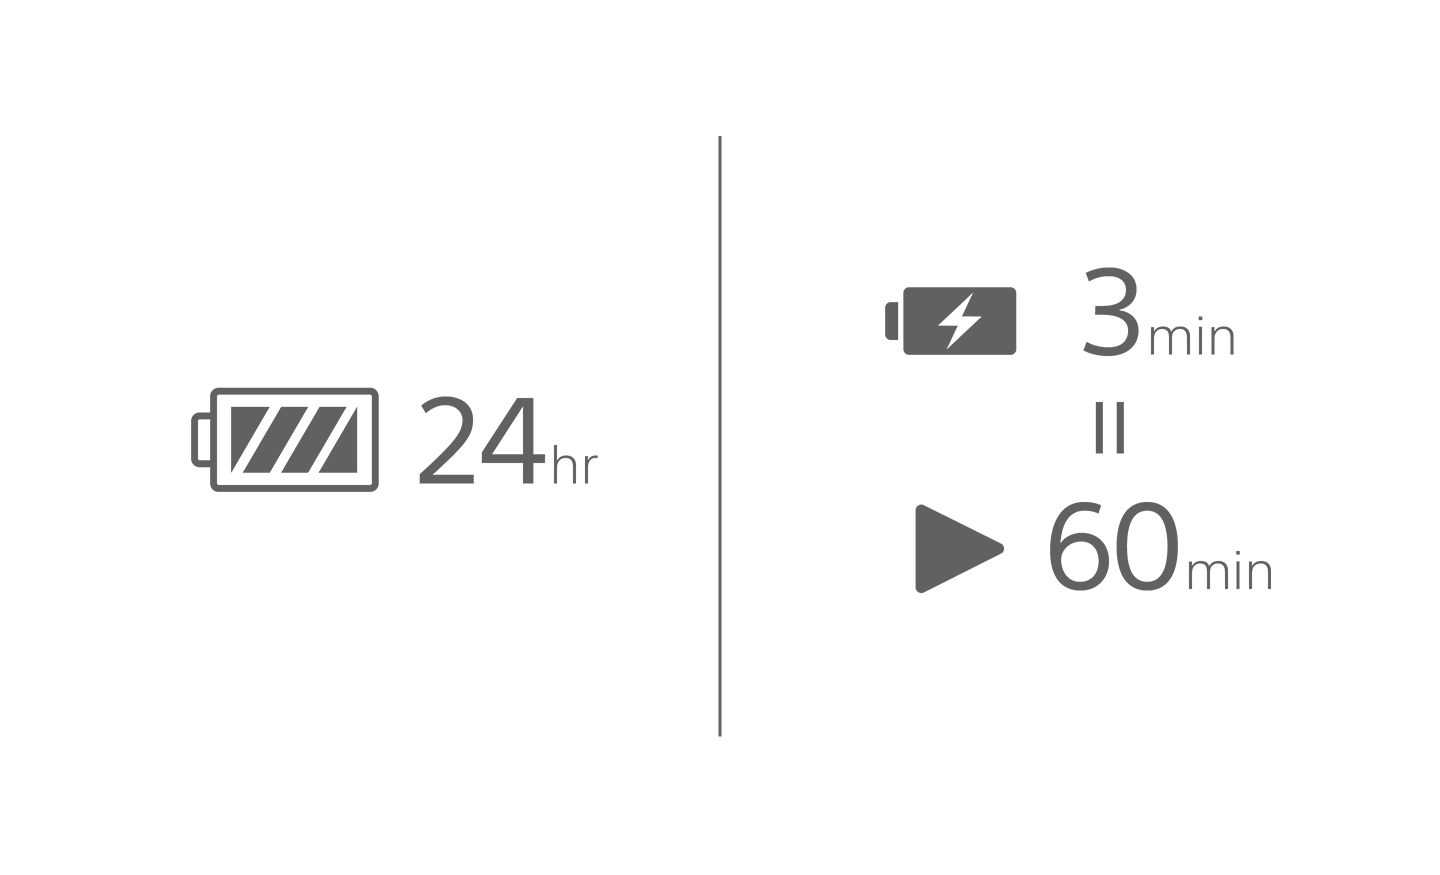 Image of a battery icon with 24 hr text, another battery with a charging symbol and 3 min above a play icon with 60 min